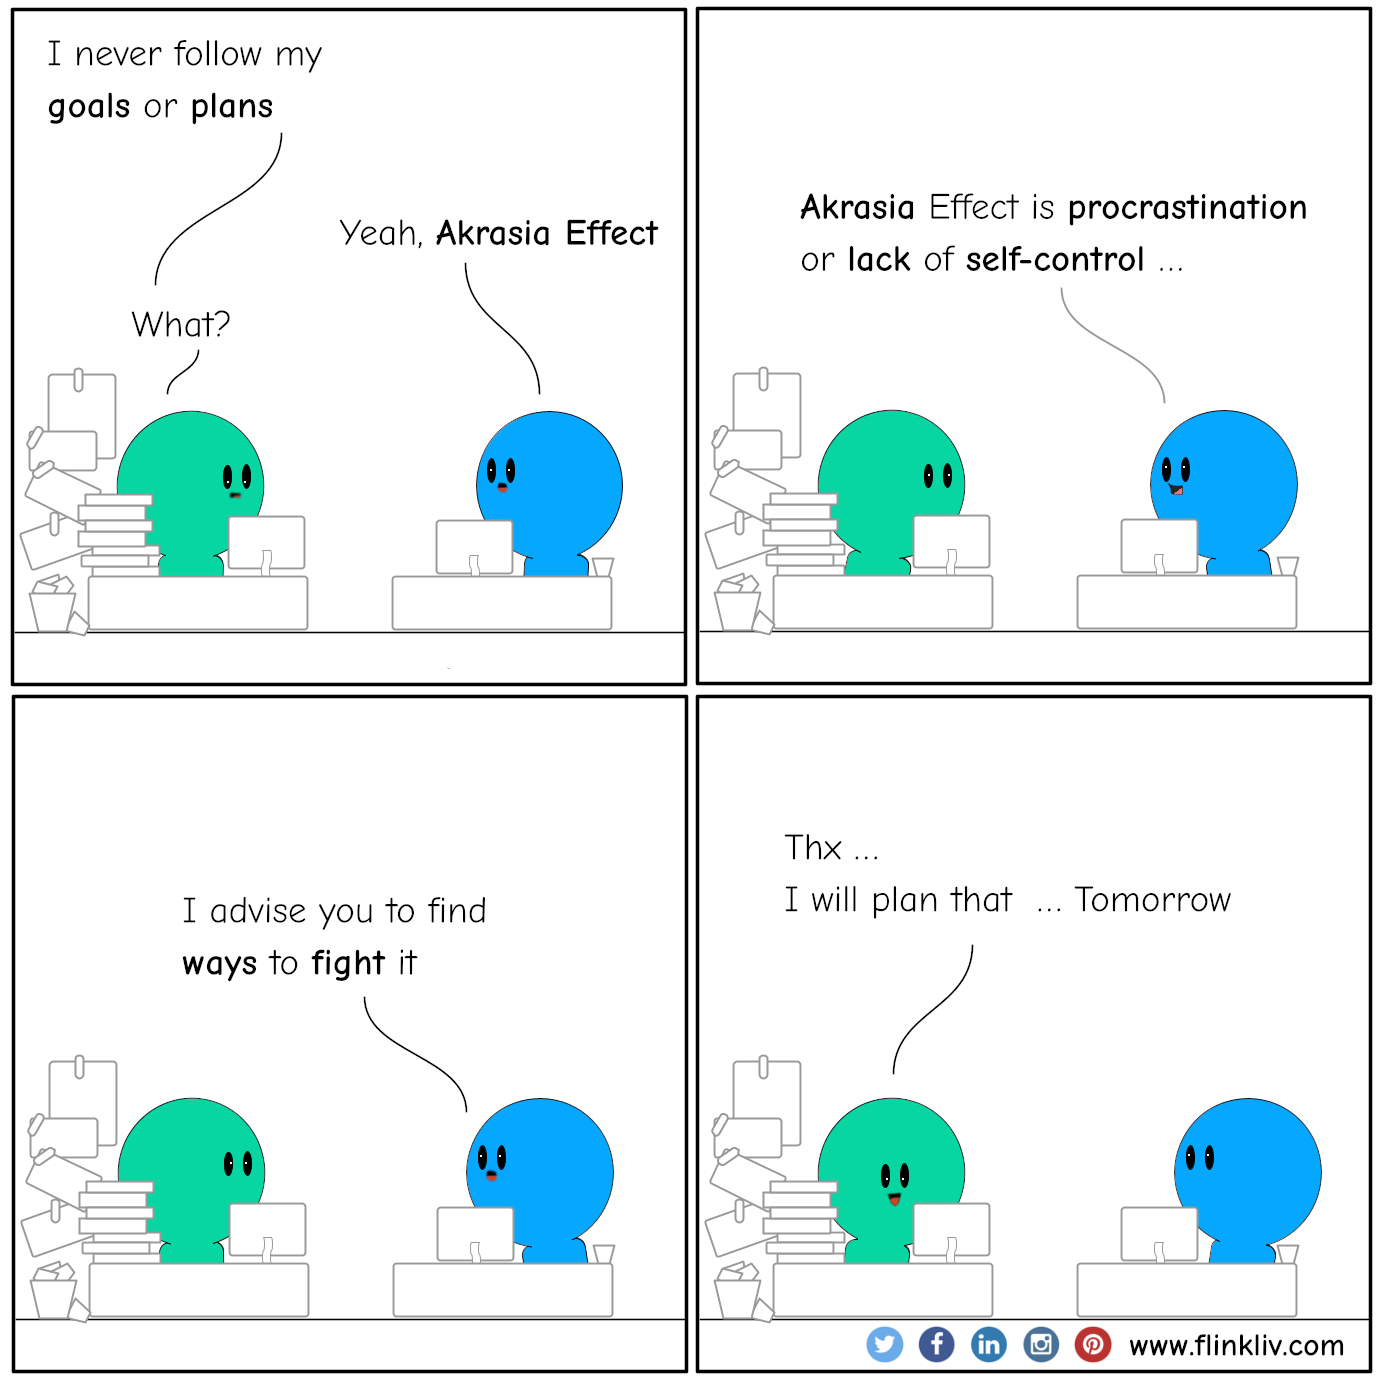 Conversation between A and B about the Akrasia Effect. 
    A: I never follow my goals or plans
    B: Yeah, Akrasia Effect
    A: What?
    B: Akrasia Effect is procrastination or lack of self-control.
    B: I advise you to find ways to fight it.
    A: Thx, I will plan that tomorrow.
    By flinkliv.com